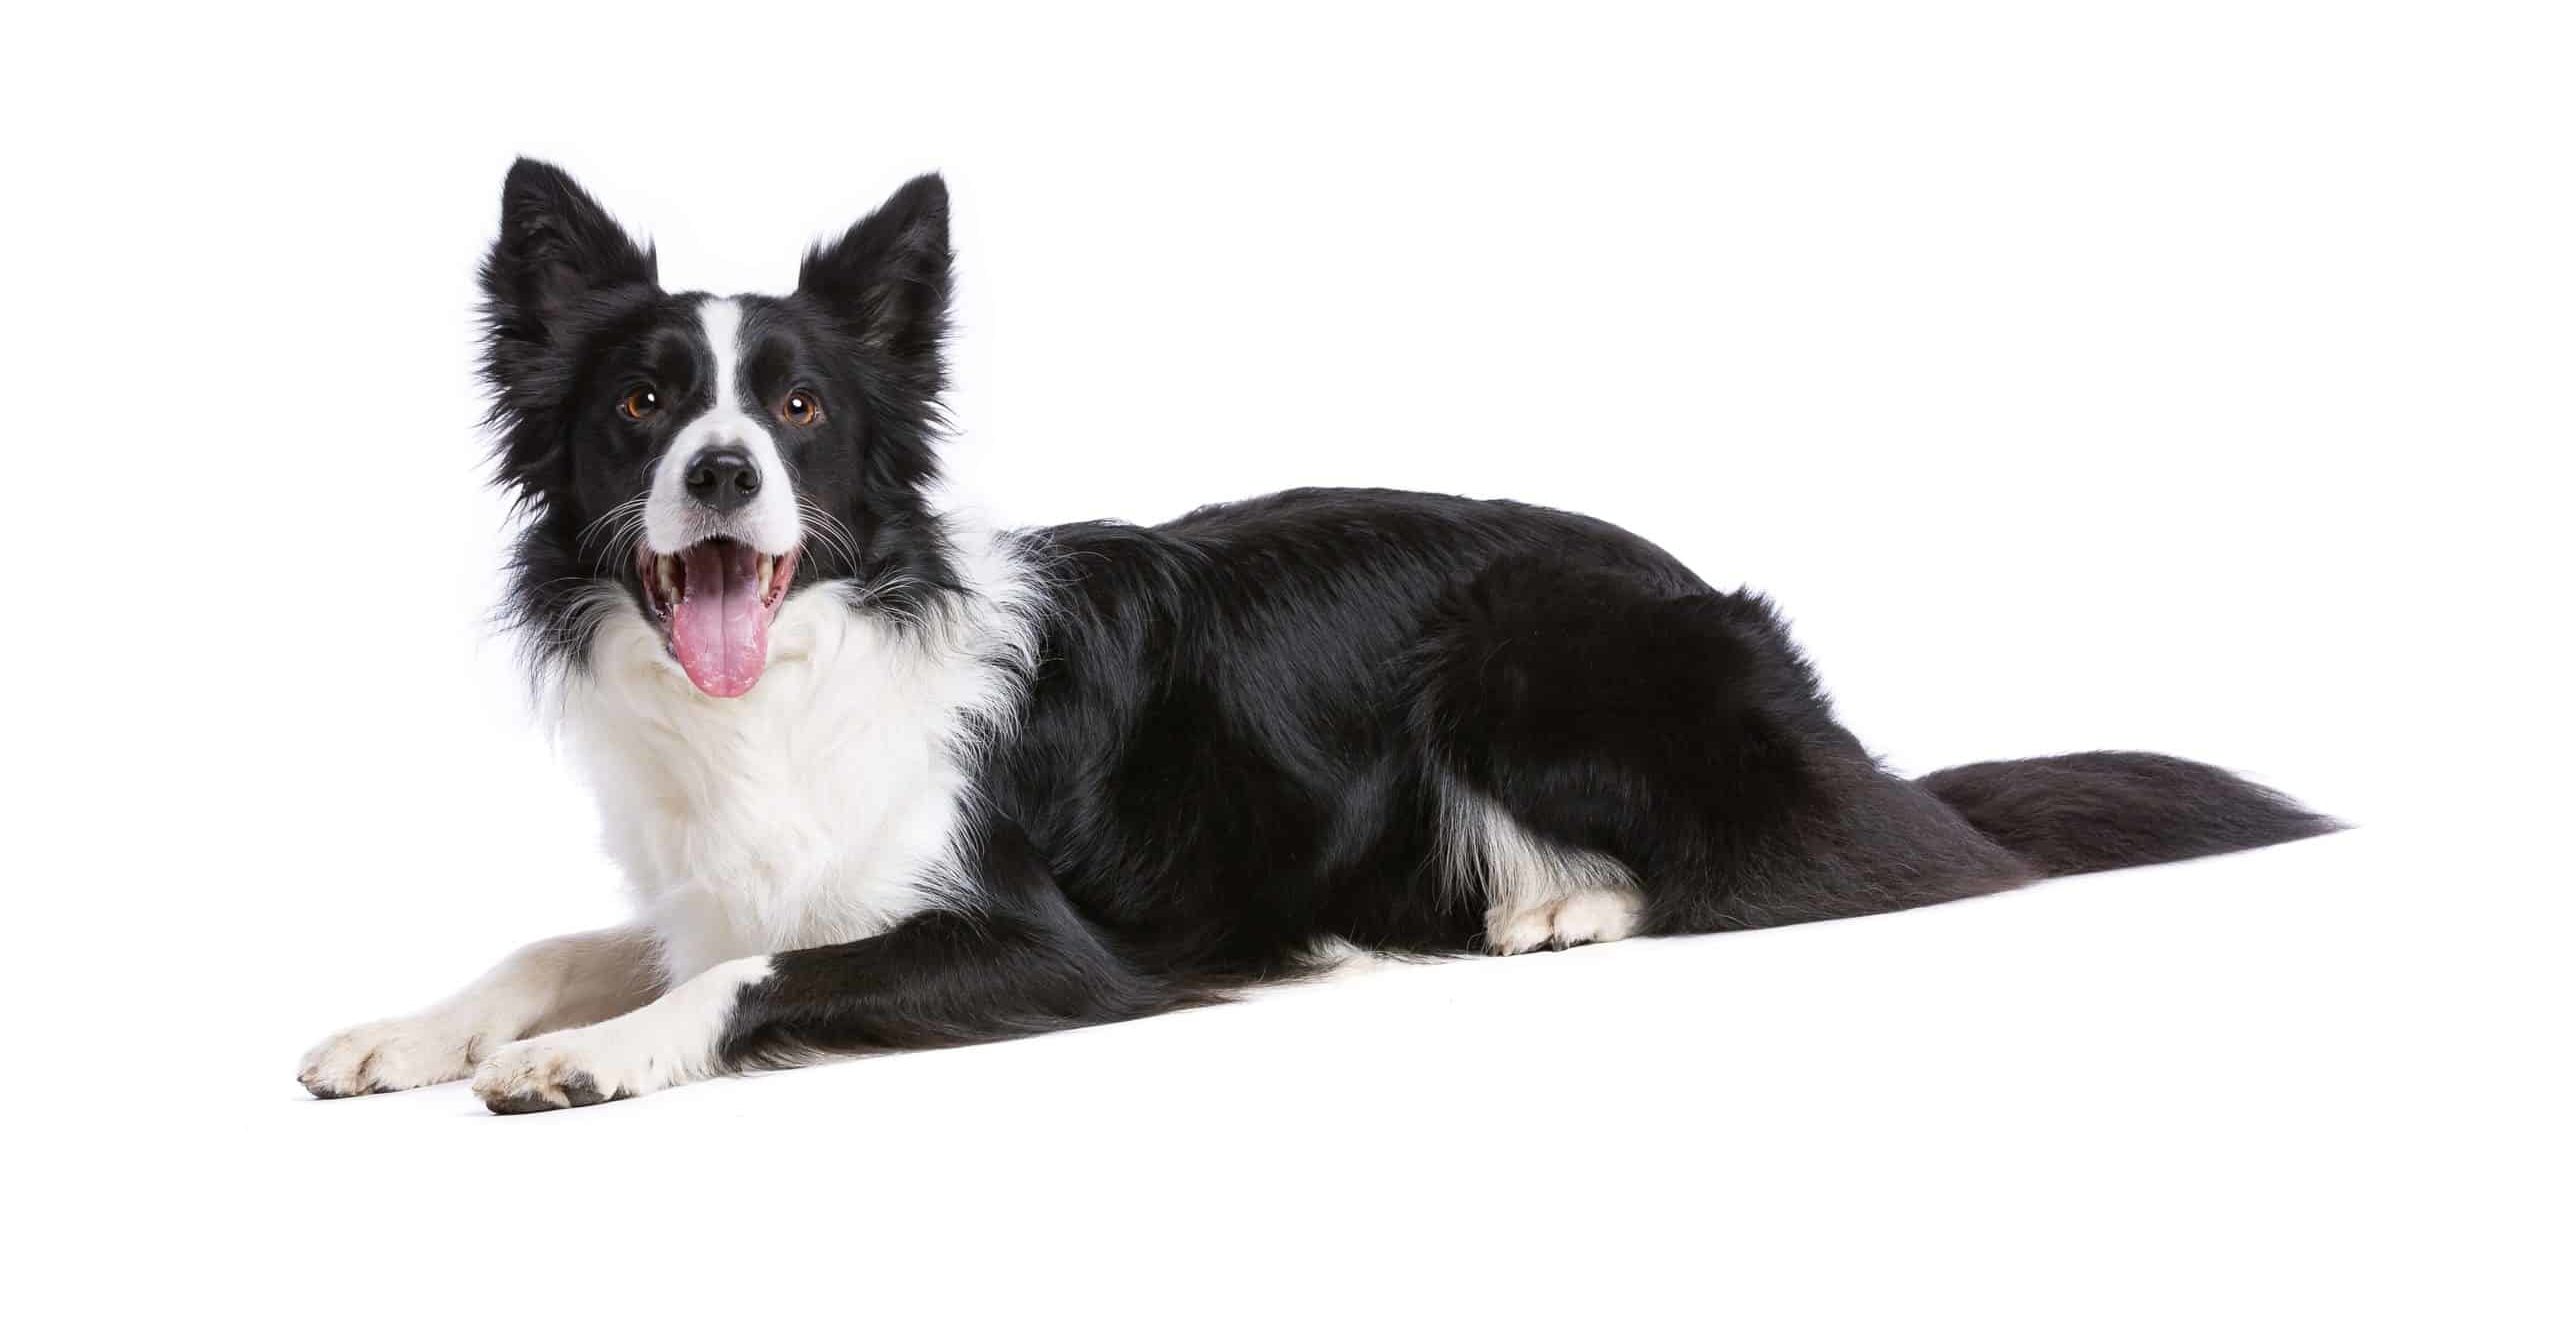 Border collies: High-energy, smart dogs that need lots of exercise